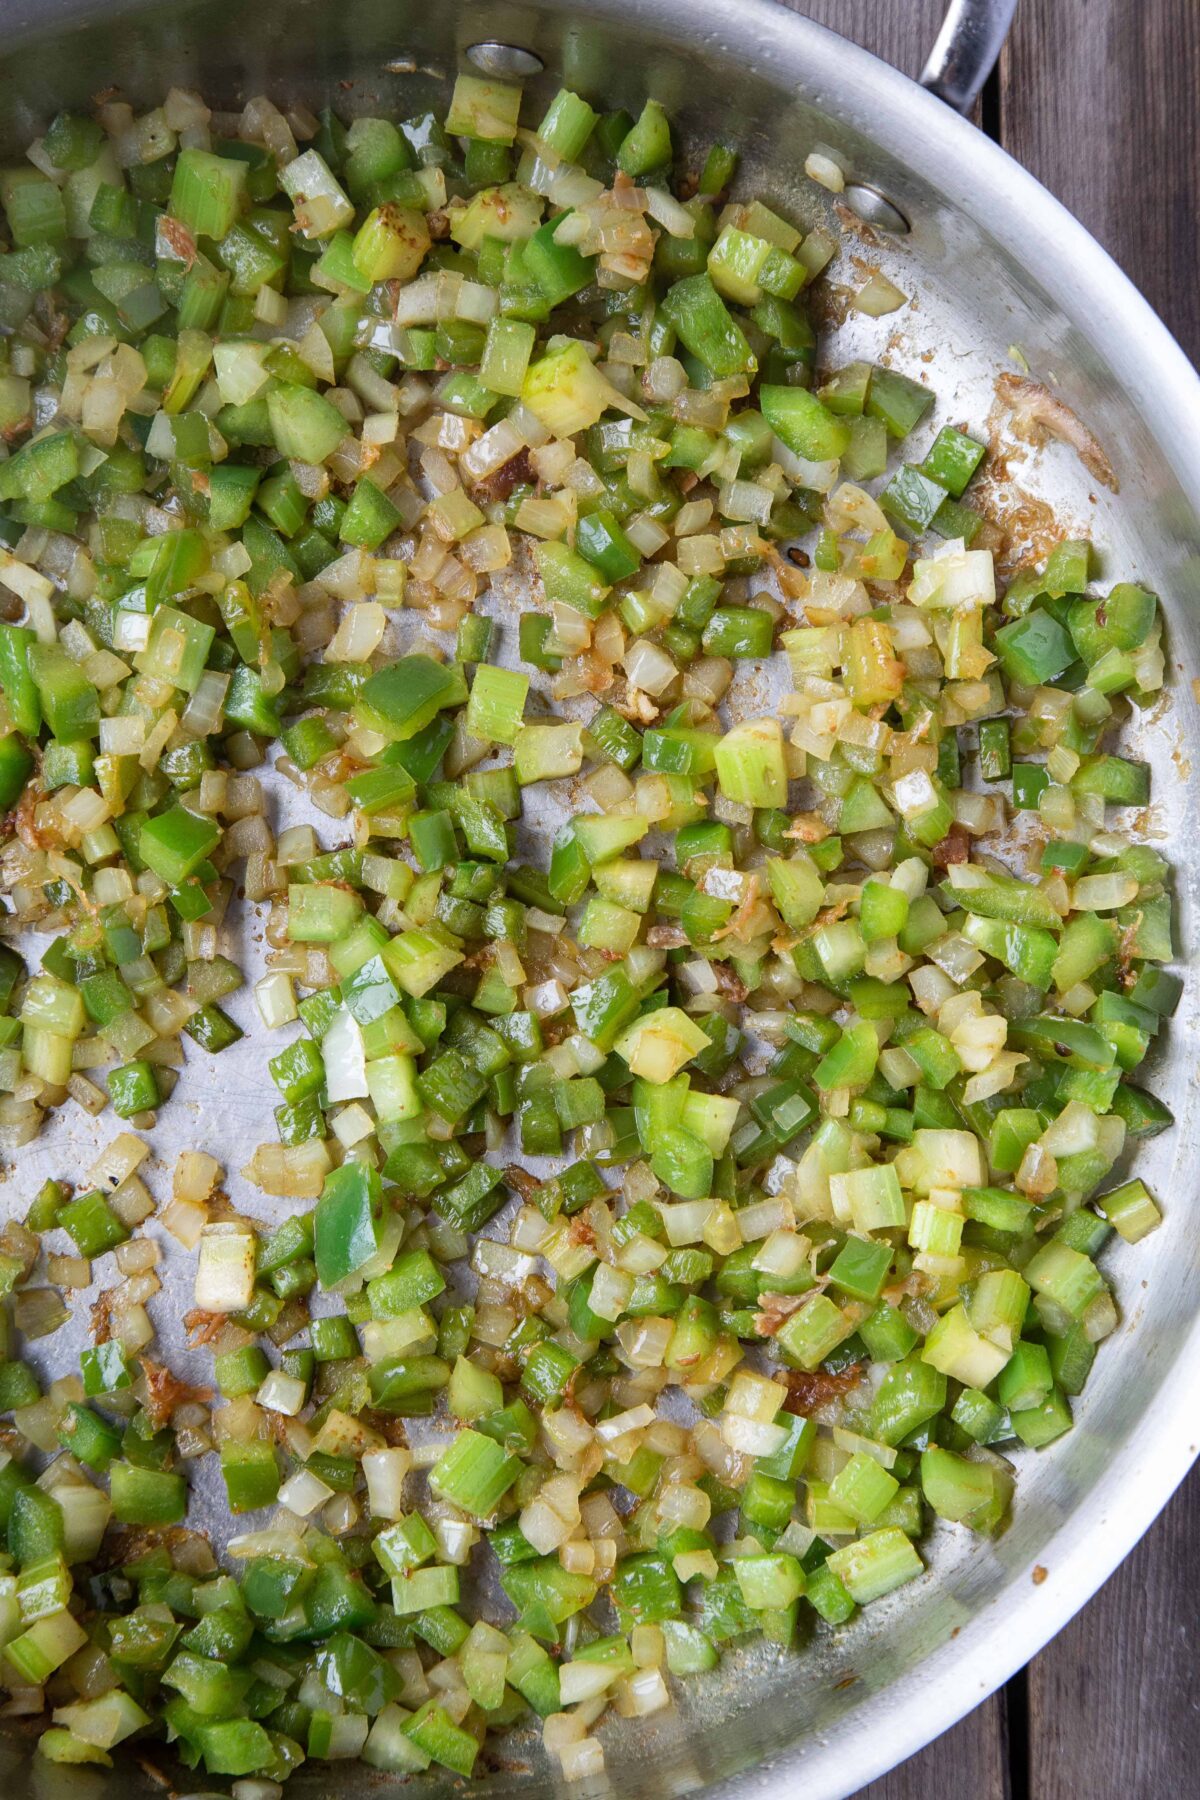 holy trinity of onion, green pepper, and celery sautéing in a large pan.